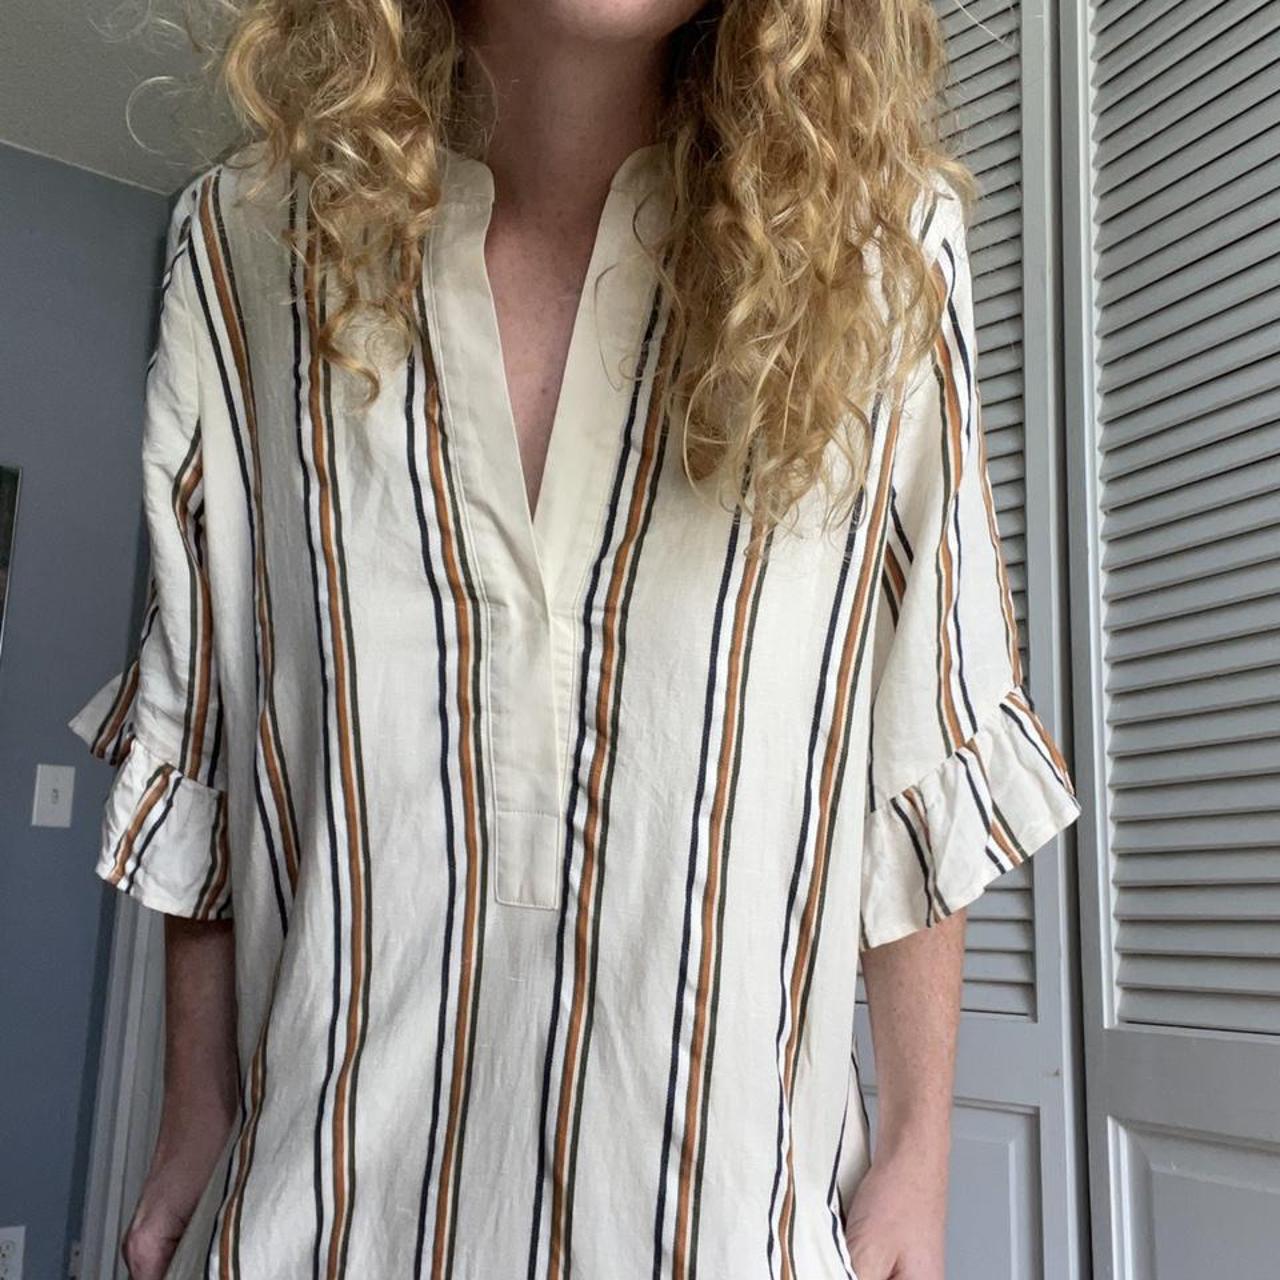 Product Image 1 - Whistles pinstripe shirt dress.

Stripes are